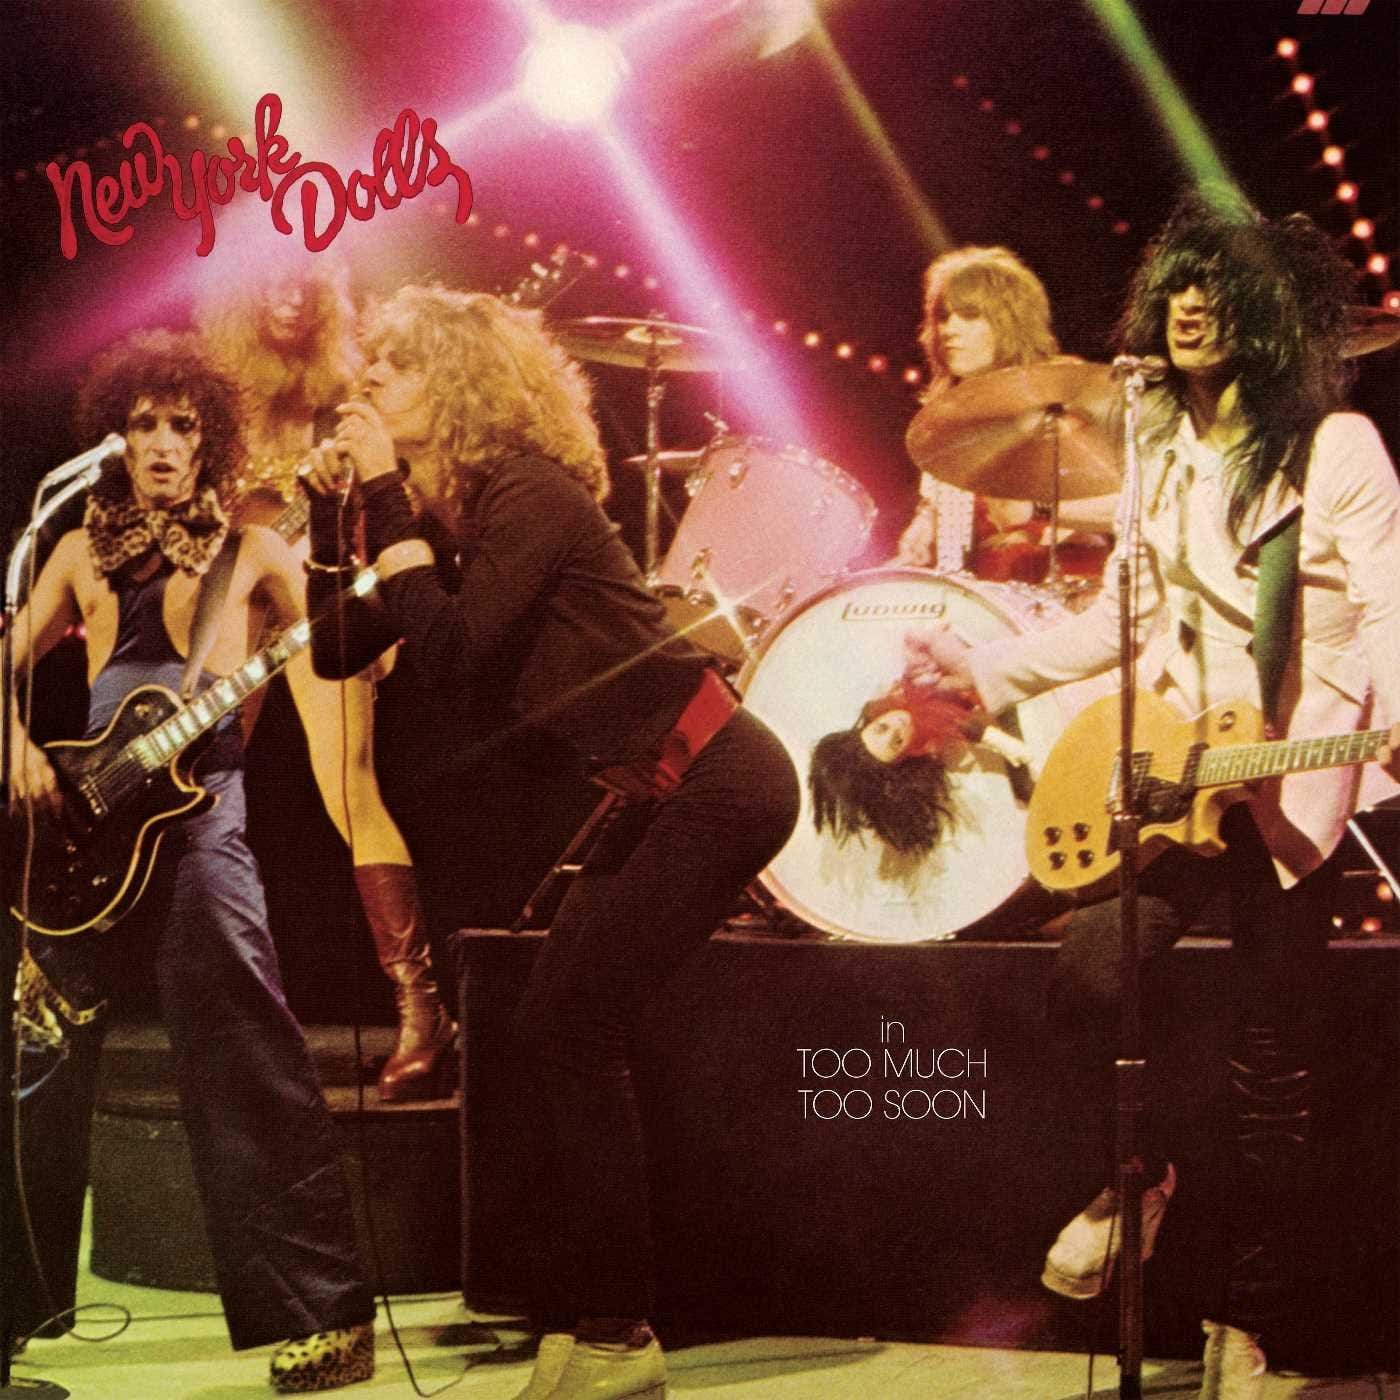 NEW YORK DOLLS: In Too Much Too Soon LP